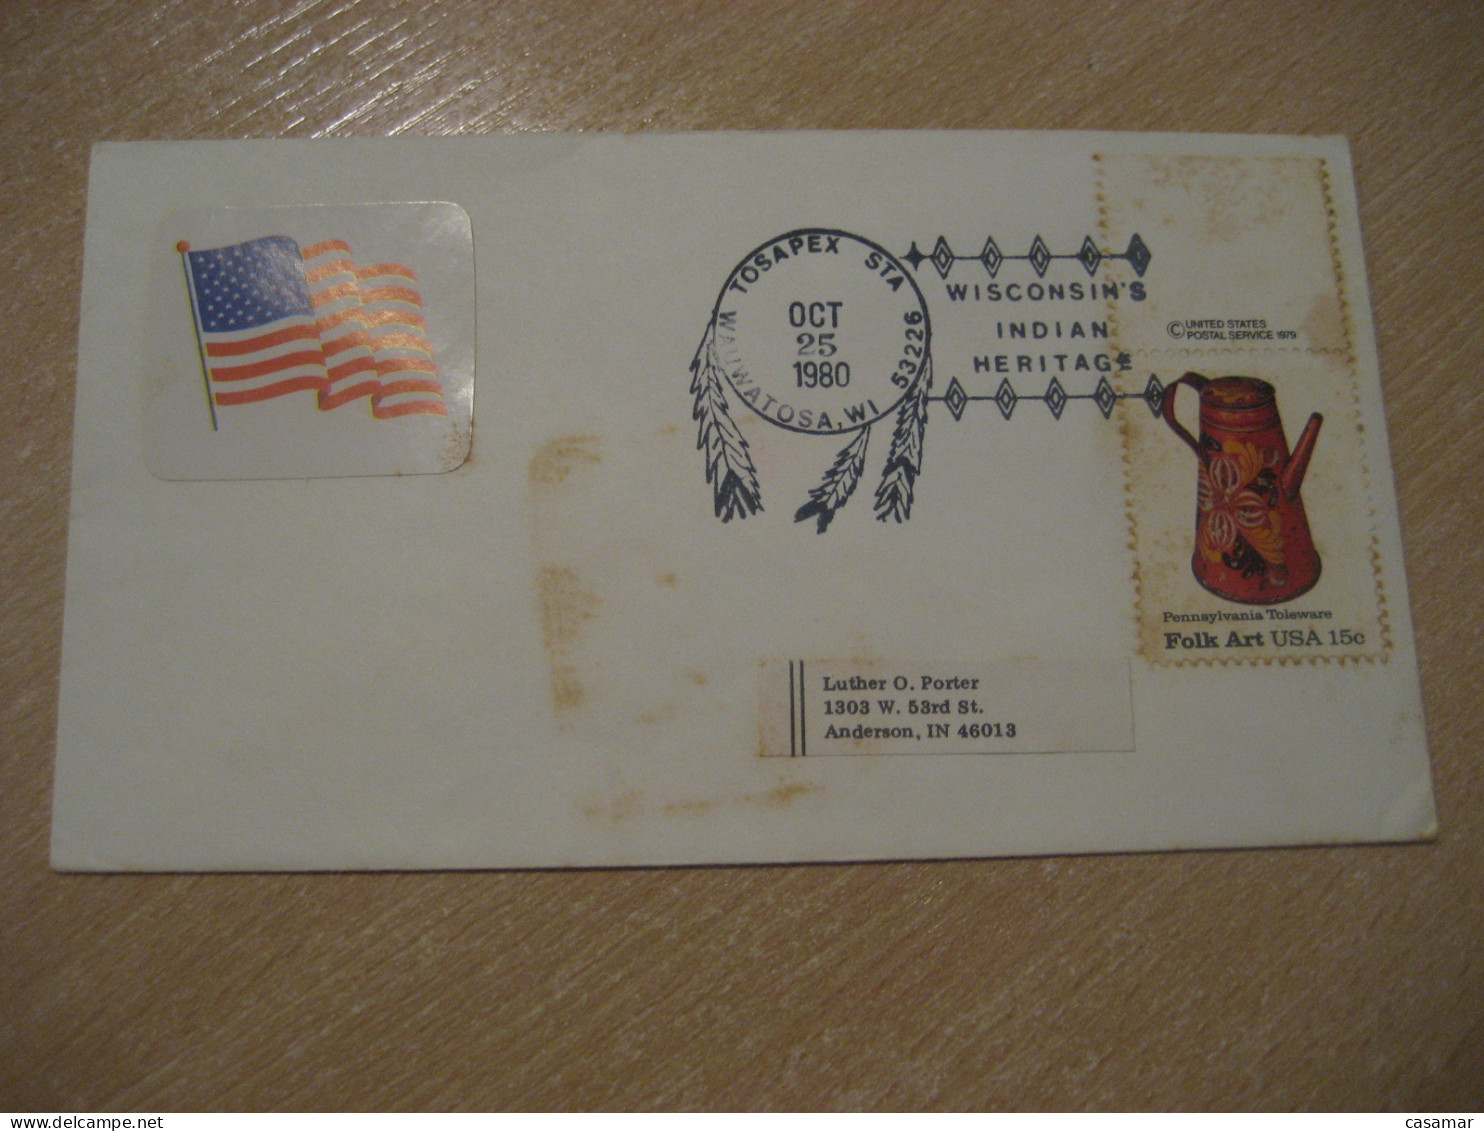 WAUWATOSA 1980 Tosapex Wisconsin Indian Heritage American Indians Indian Cancel Cover USA Indigenous Native History - American Indians